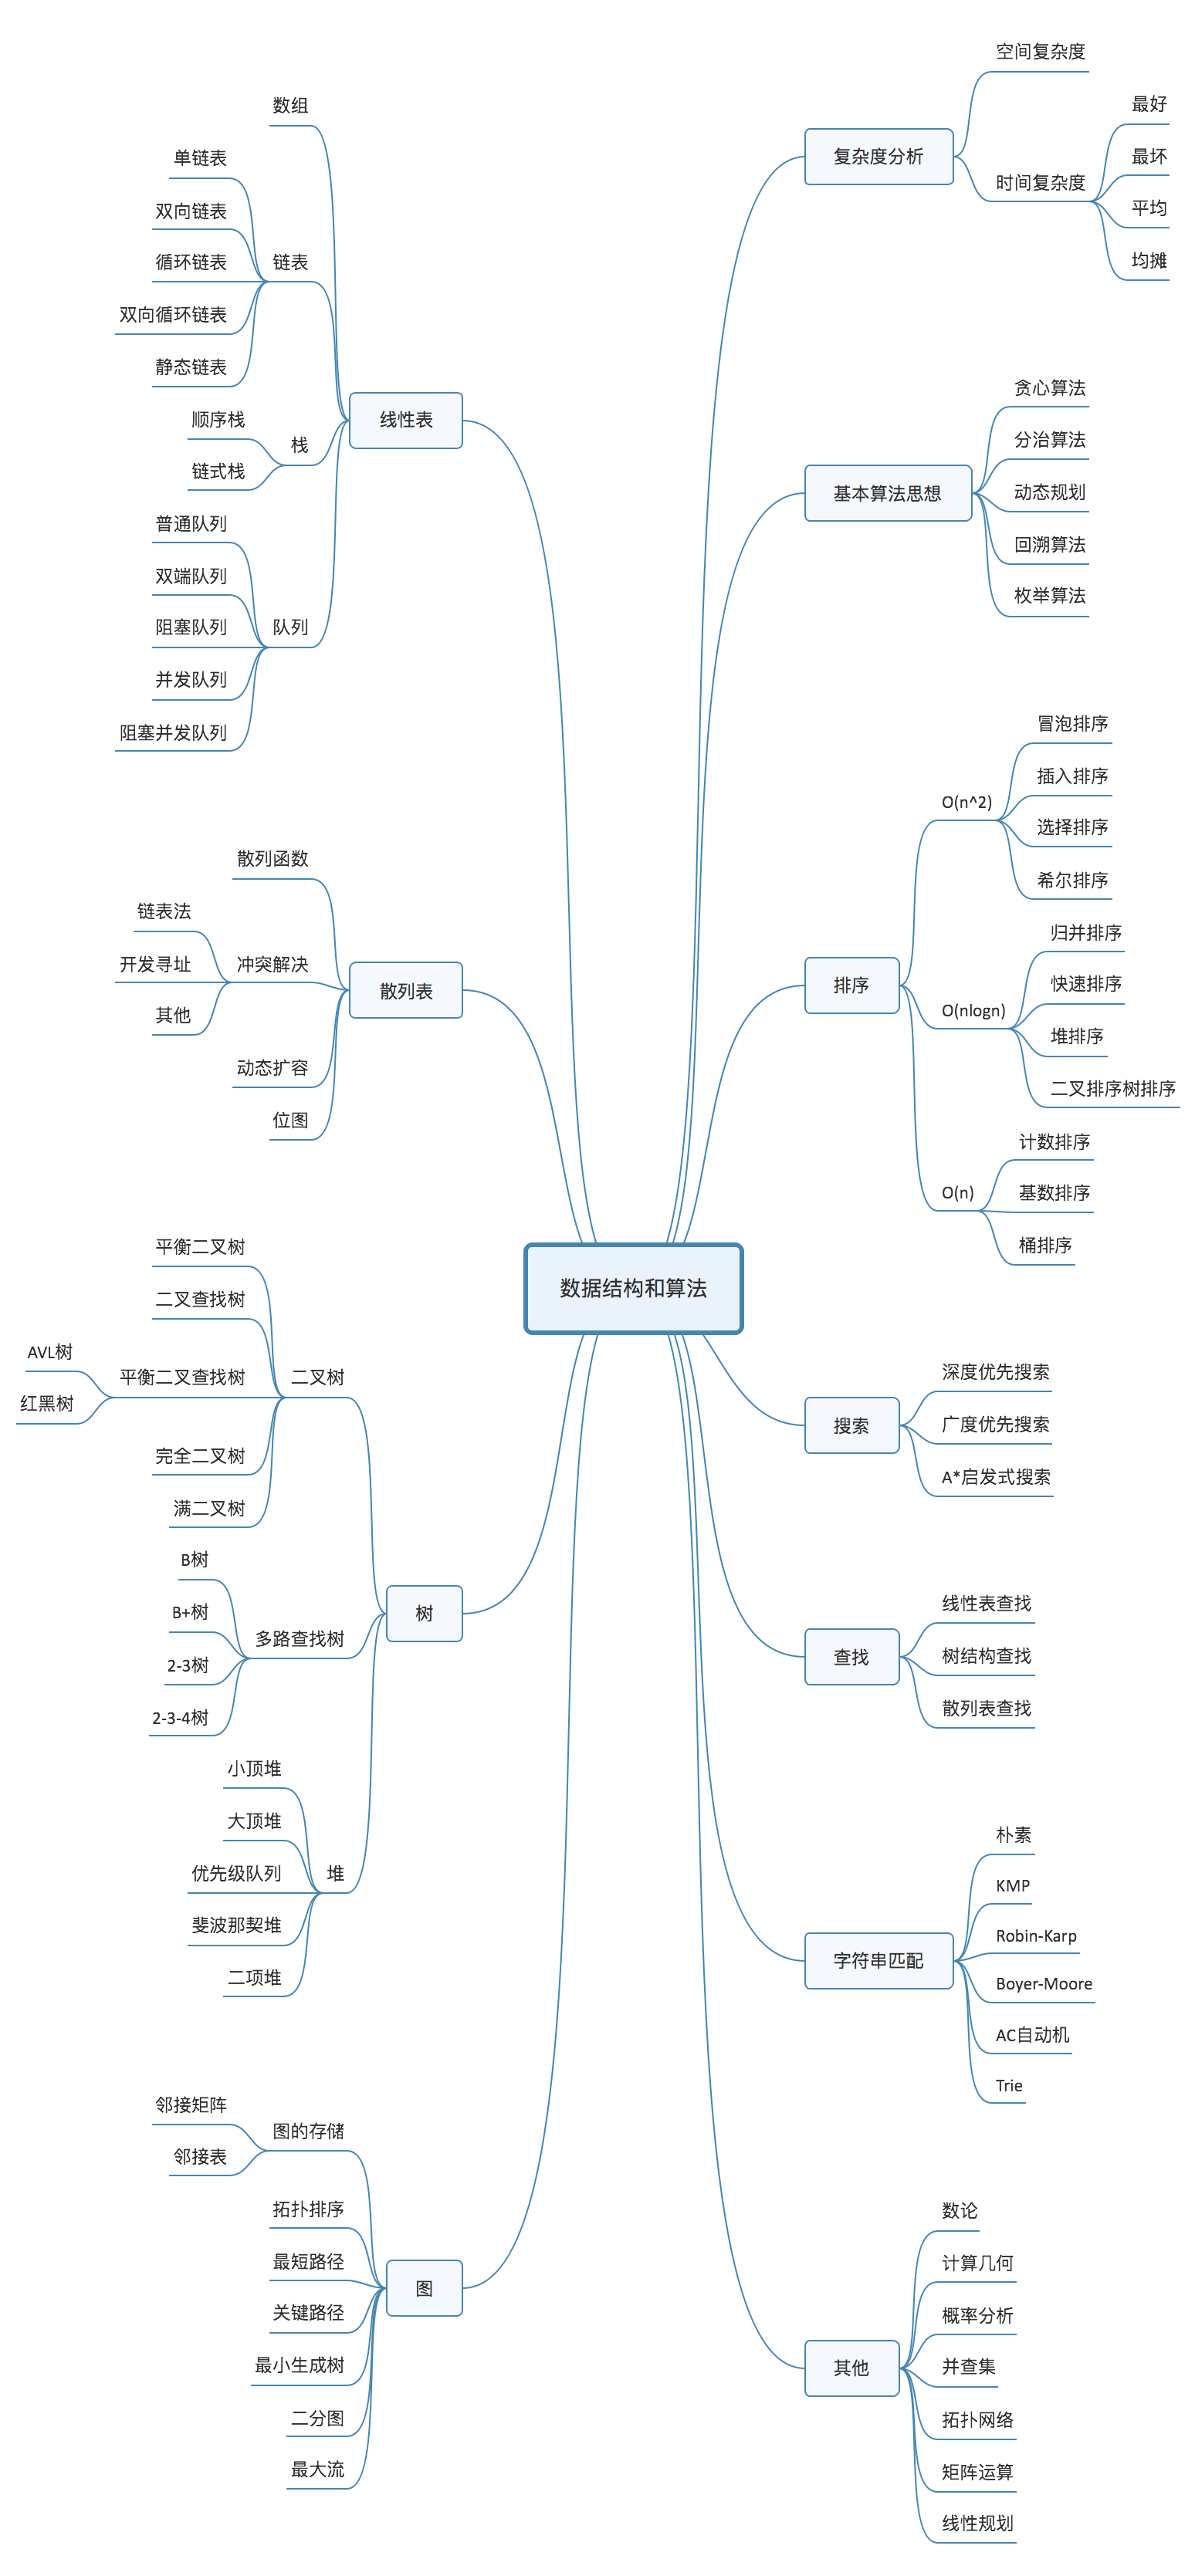 Data Structures and Algorithms Mind Map